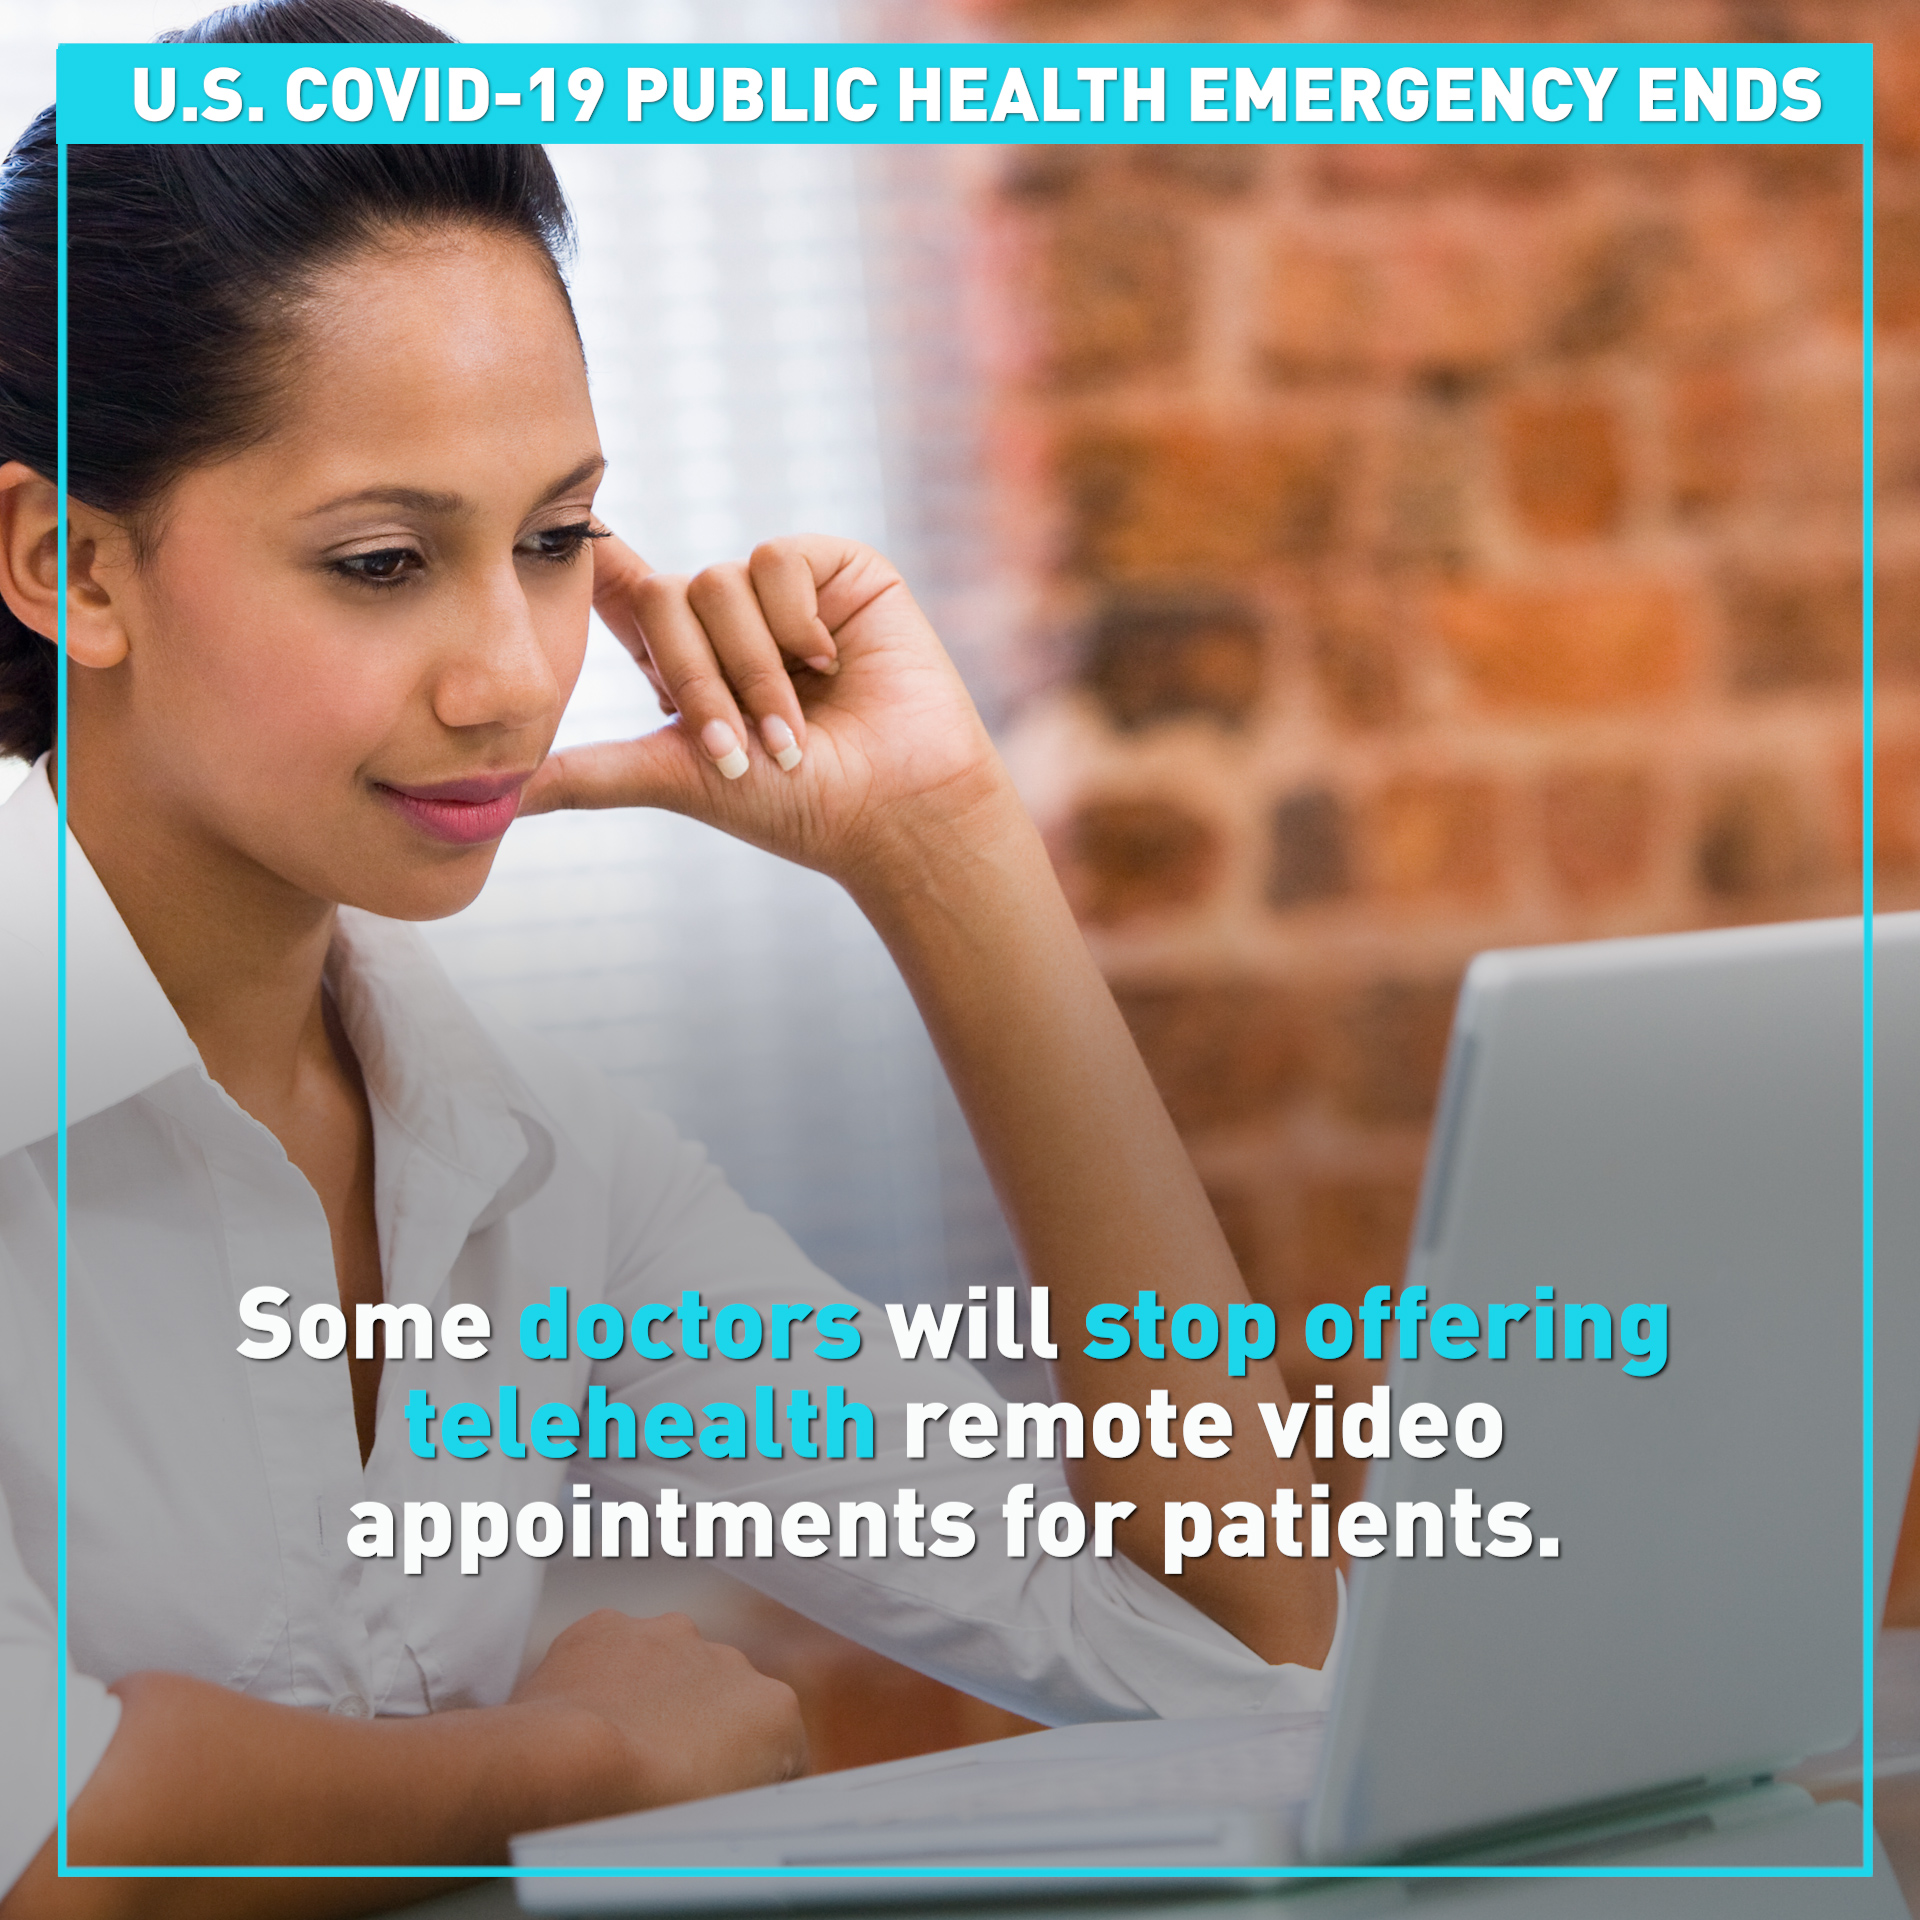 New rules to come with end of COVID-19 public health emergency in U.S. 